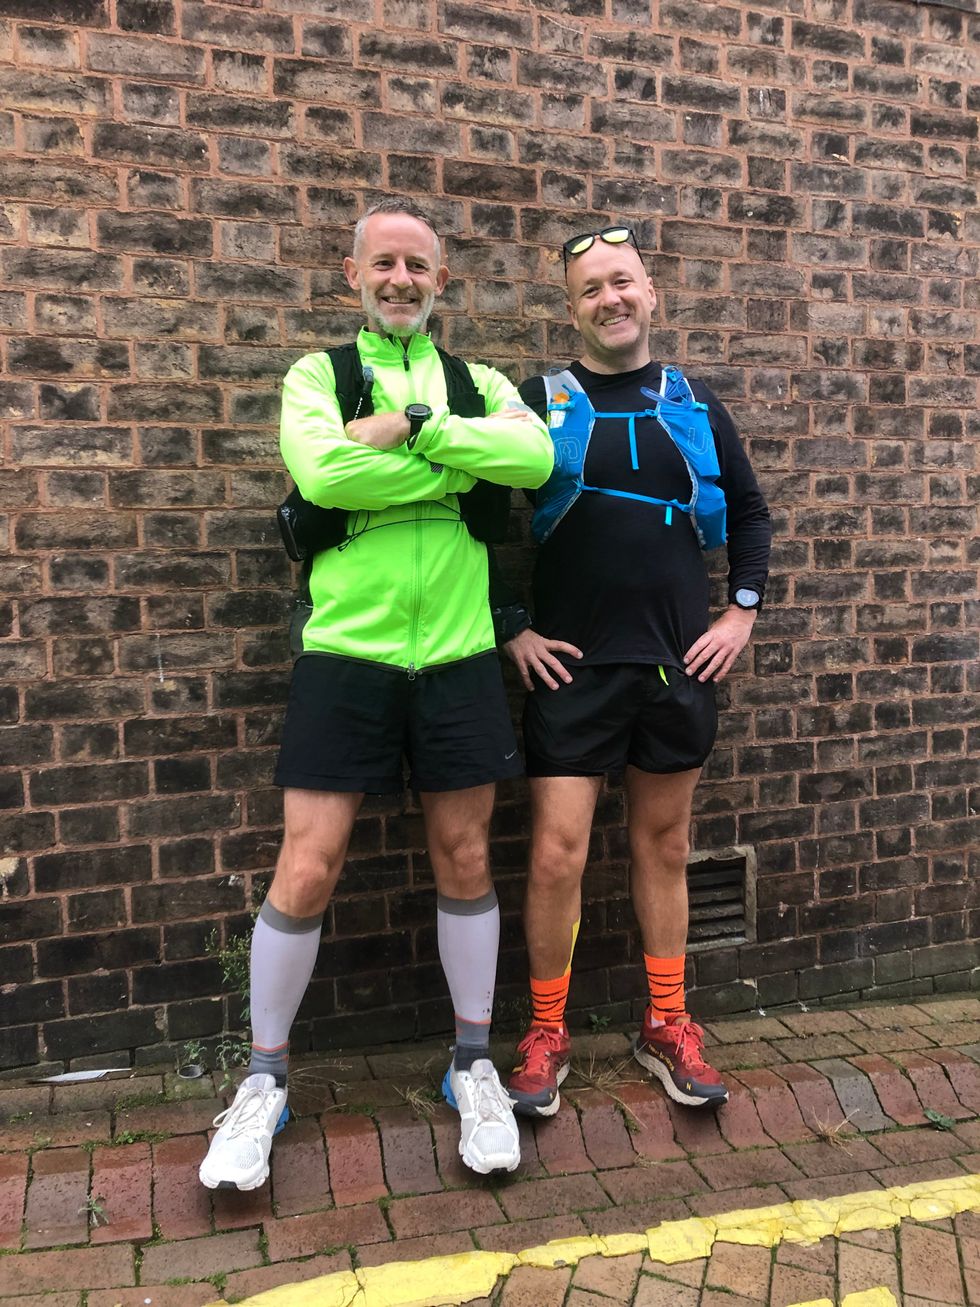 Mr Bagwell (left) said his journeys with fellow runners have been like therapy sessions (Matt Bagwell/Run The Country Ultra)